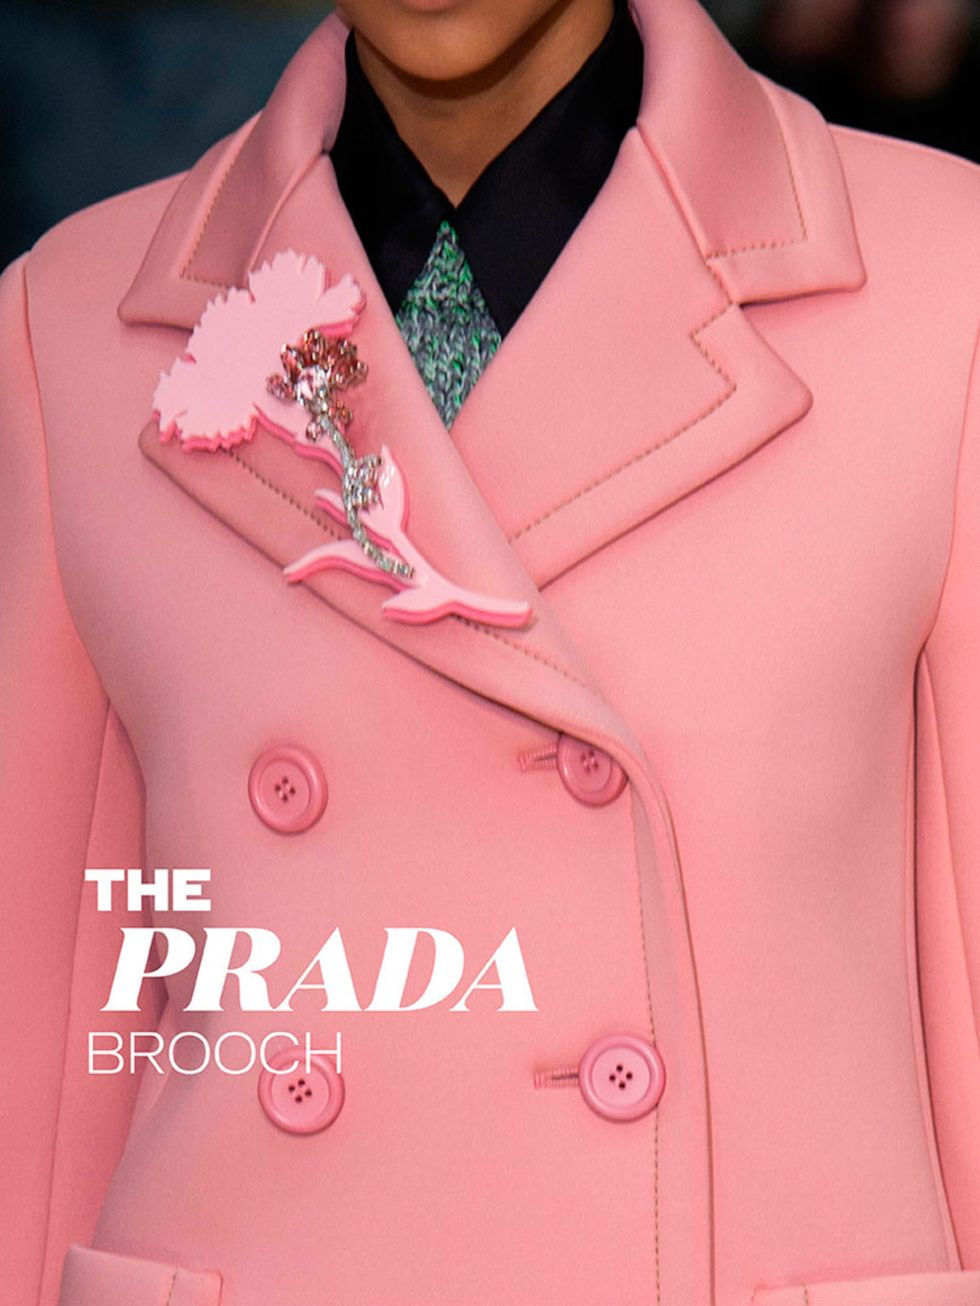 <p>The <a href="http://www.elleuk.com/fashion/news/prada-show-review-autumn-winter-2015-milan-fashion-week" target="_blank">Prada</a>&nbsp;brooch &ndash; This is the game-changer accessory. Add it to any item of clothing and you&rsquo;ll be in the autumn/